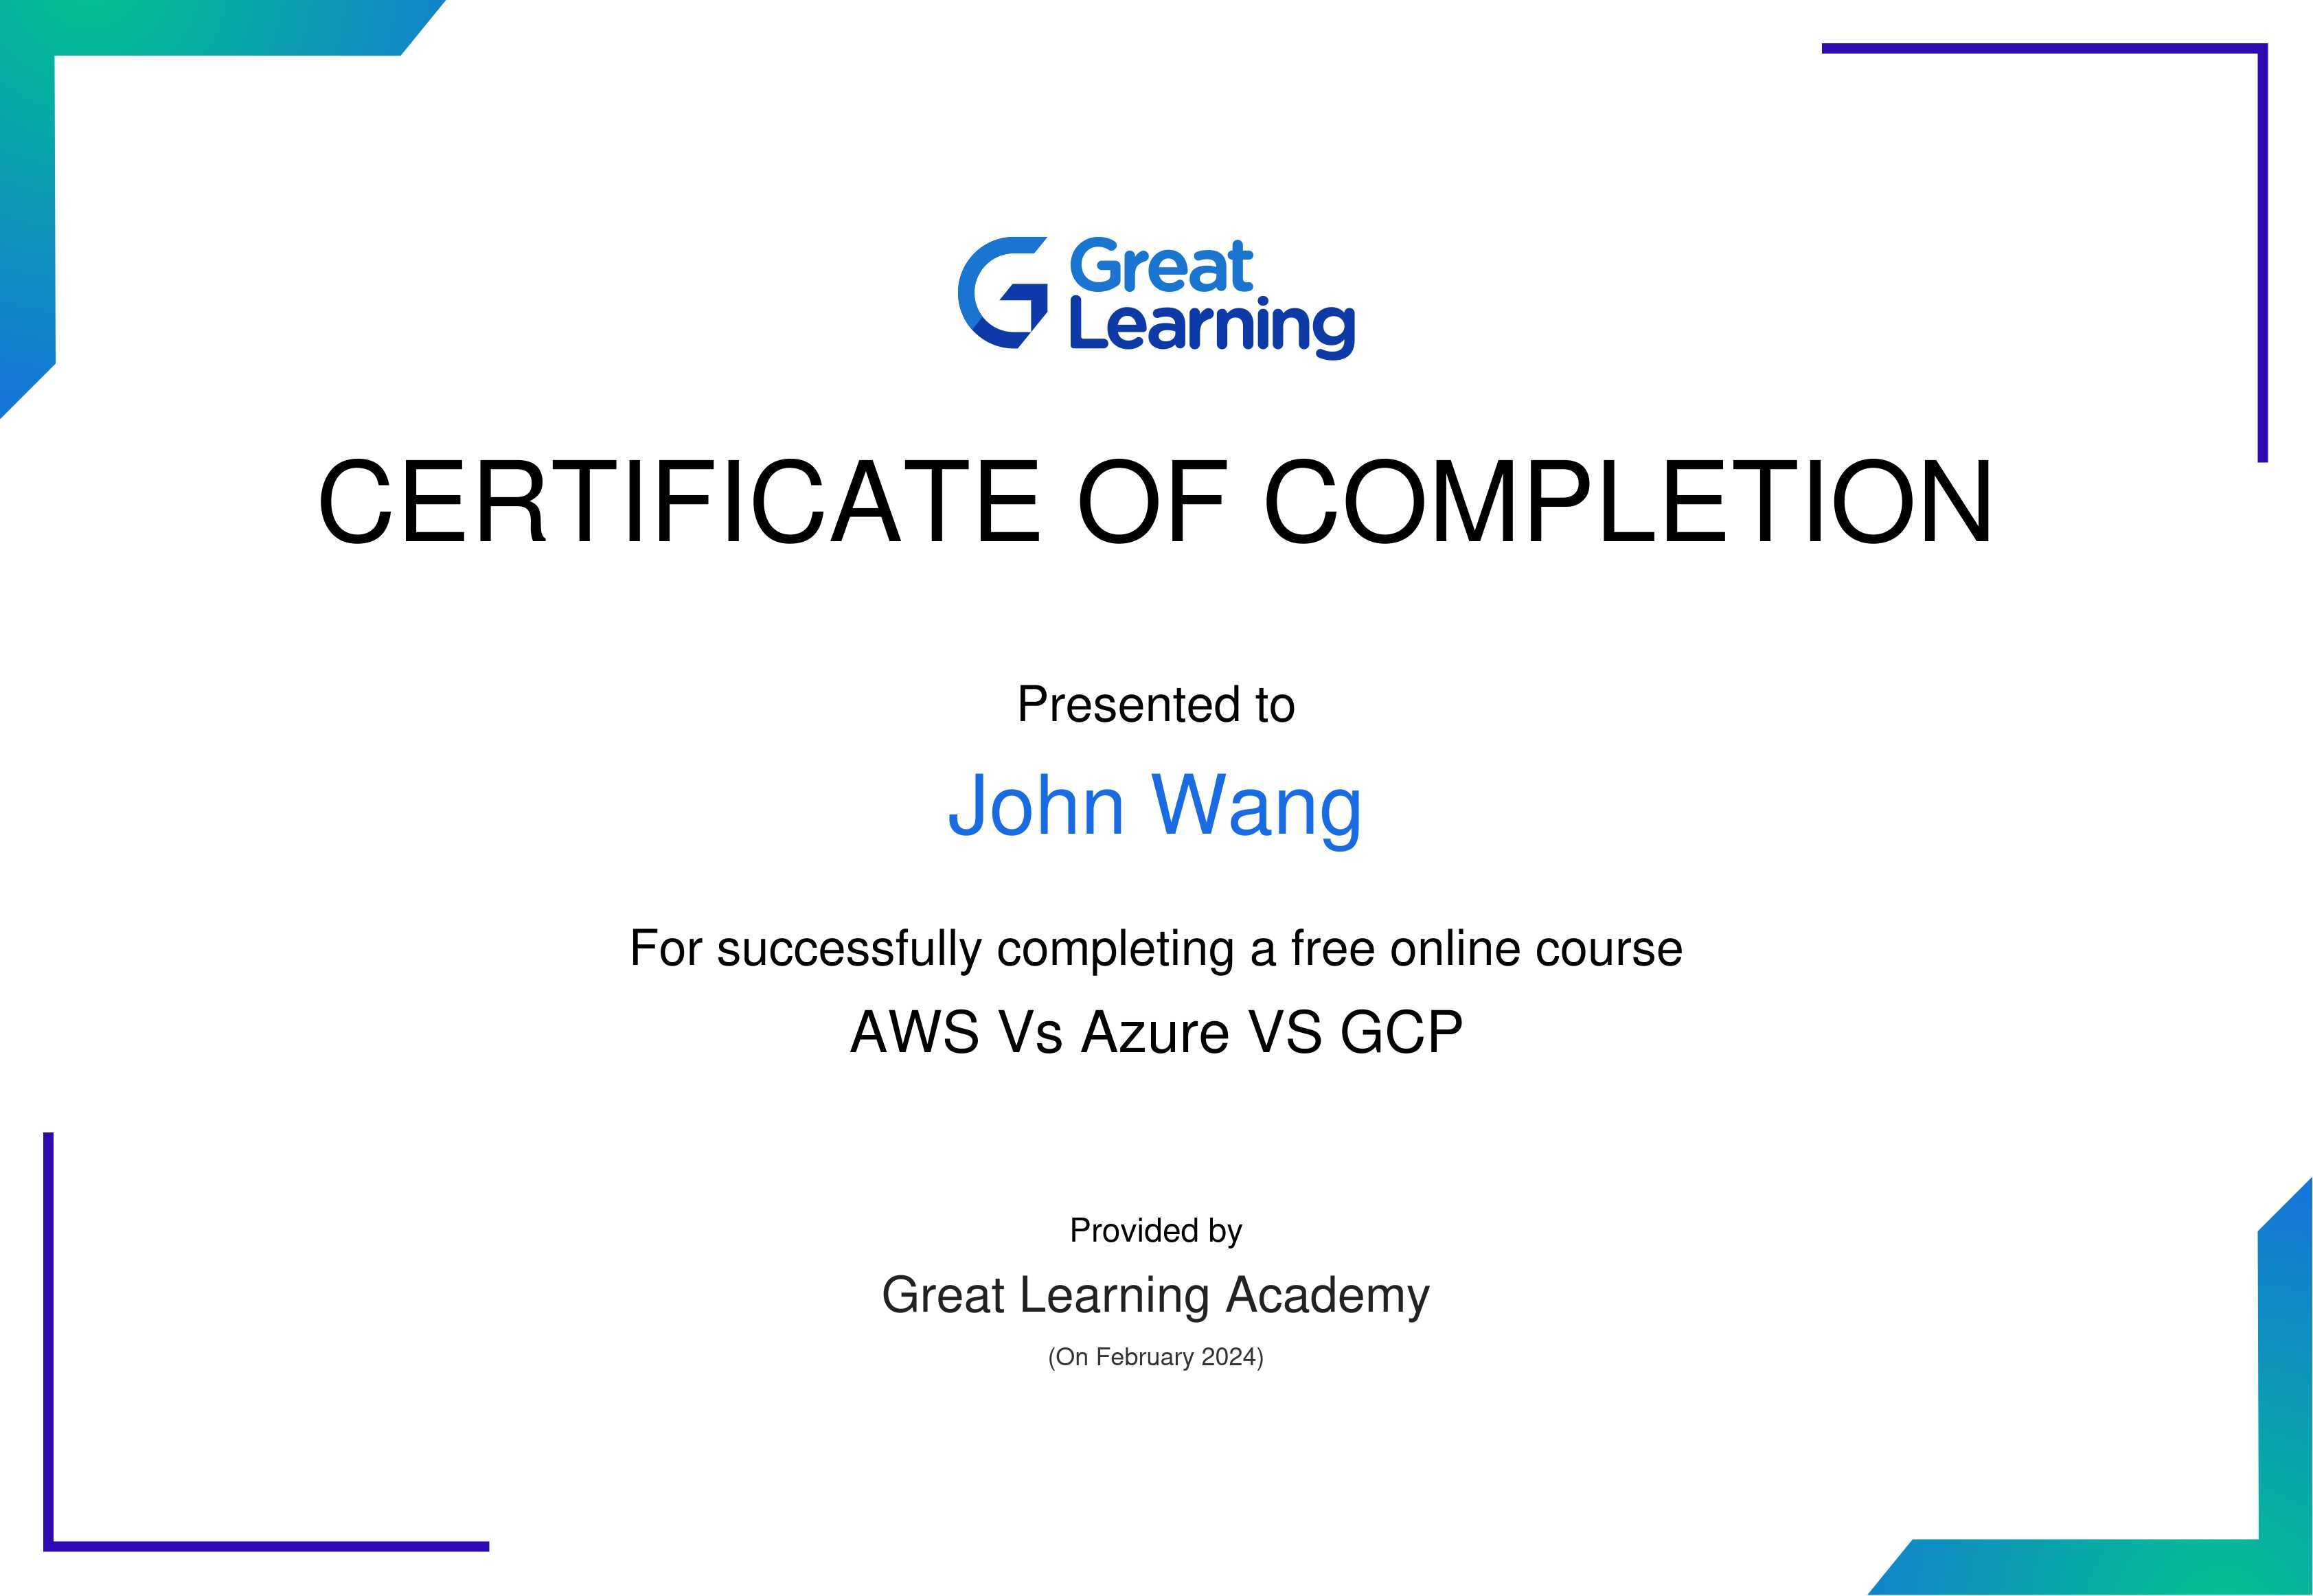 John's AWS vs Azure vs GCP from Great Learning Academy by Vishal Padghan